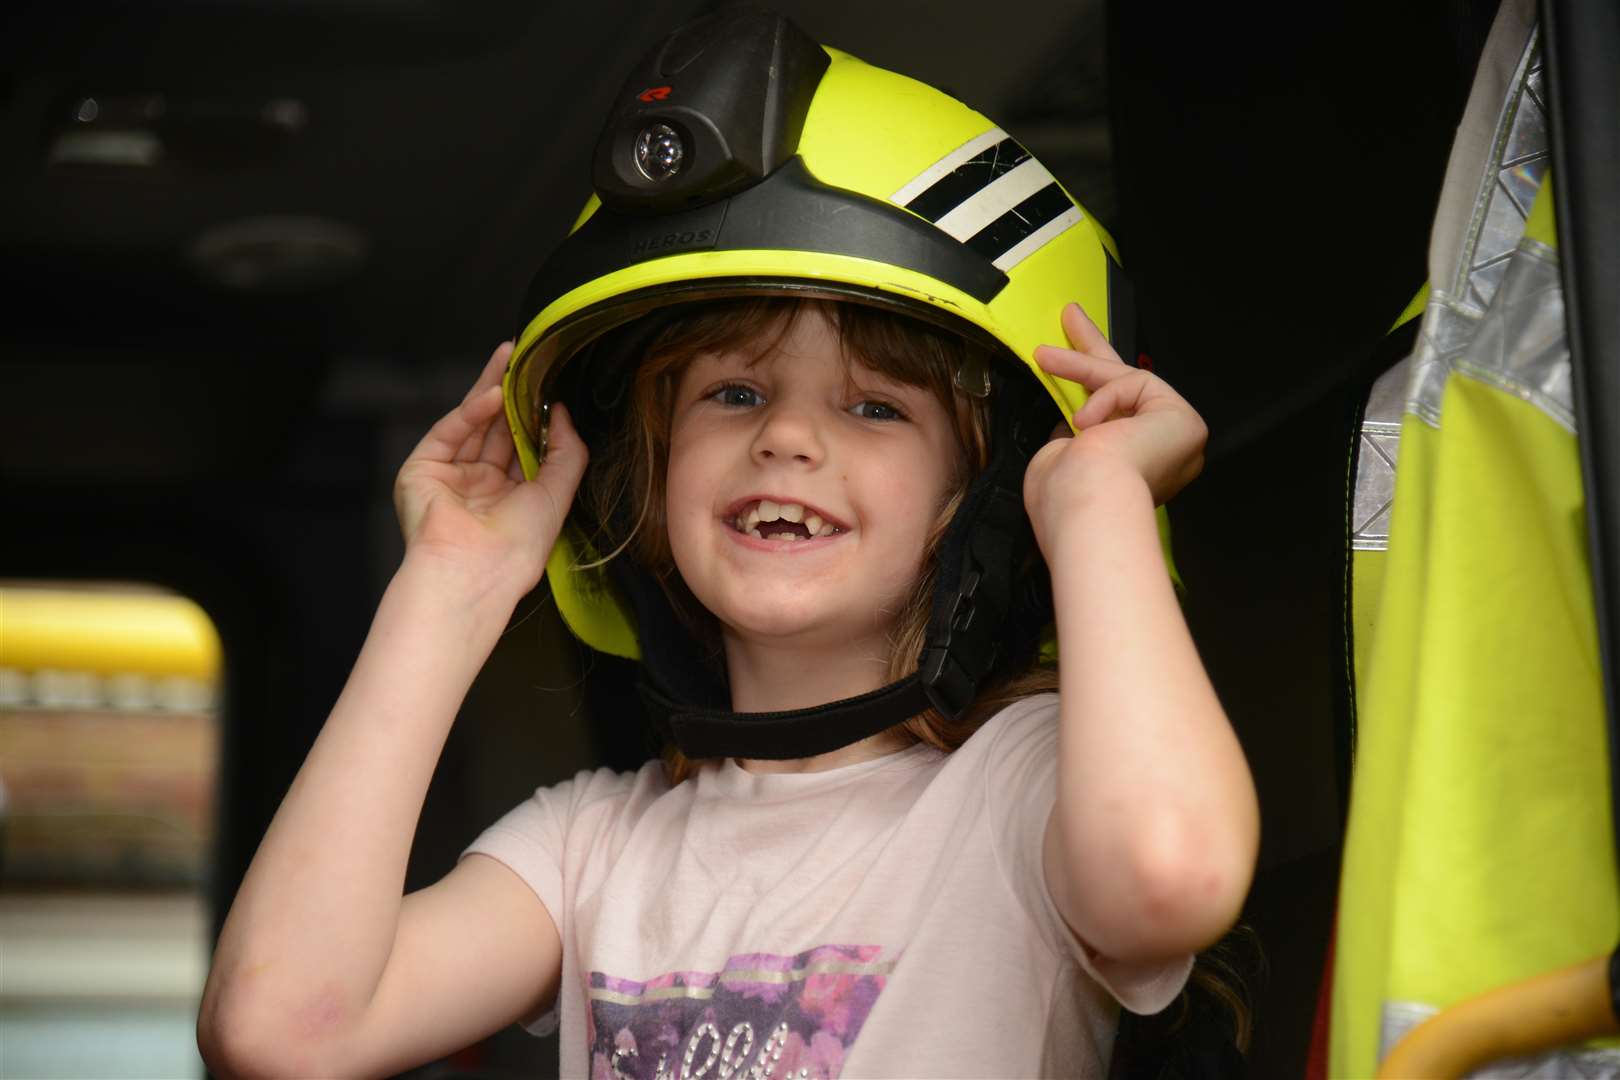 Several Kent fire stations have a fun, informative - and free - open day this summer that the kids will love. Find out when and where at www.kent.fire-uk.org